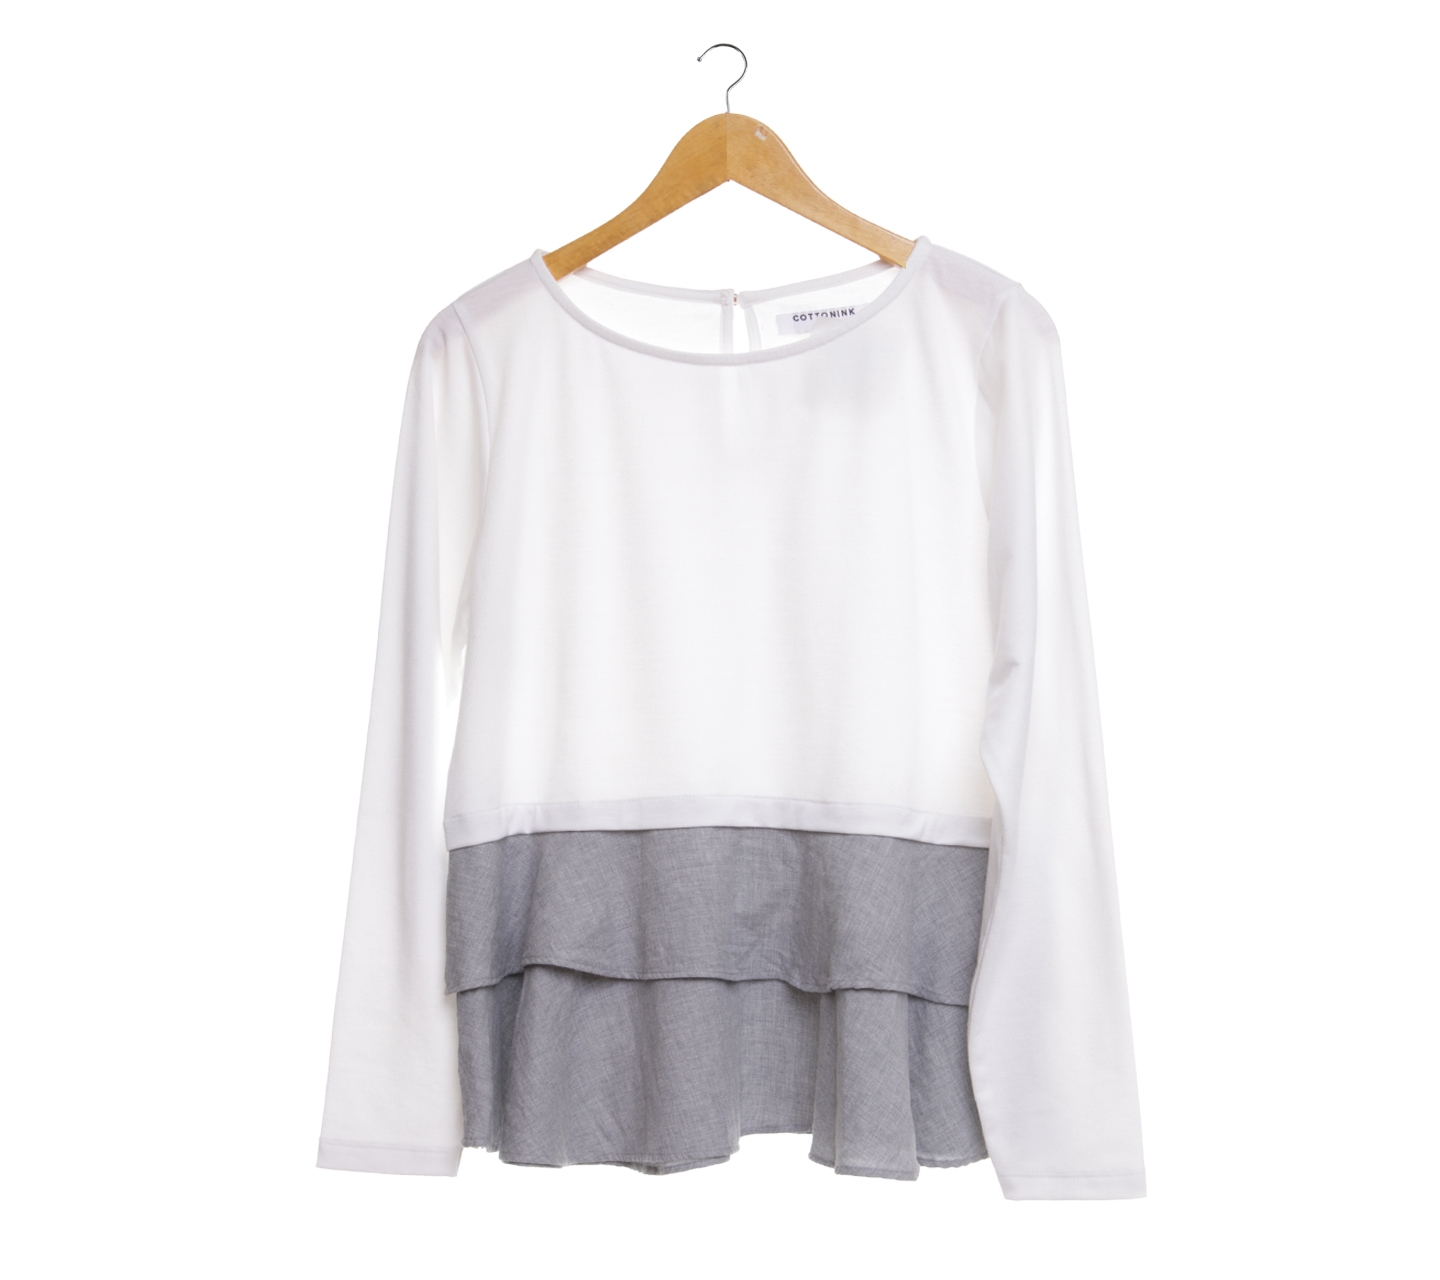 Cotton Ink White And Grey Blouse